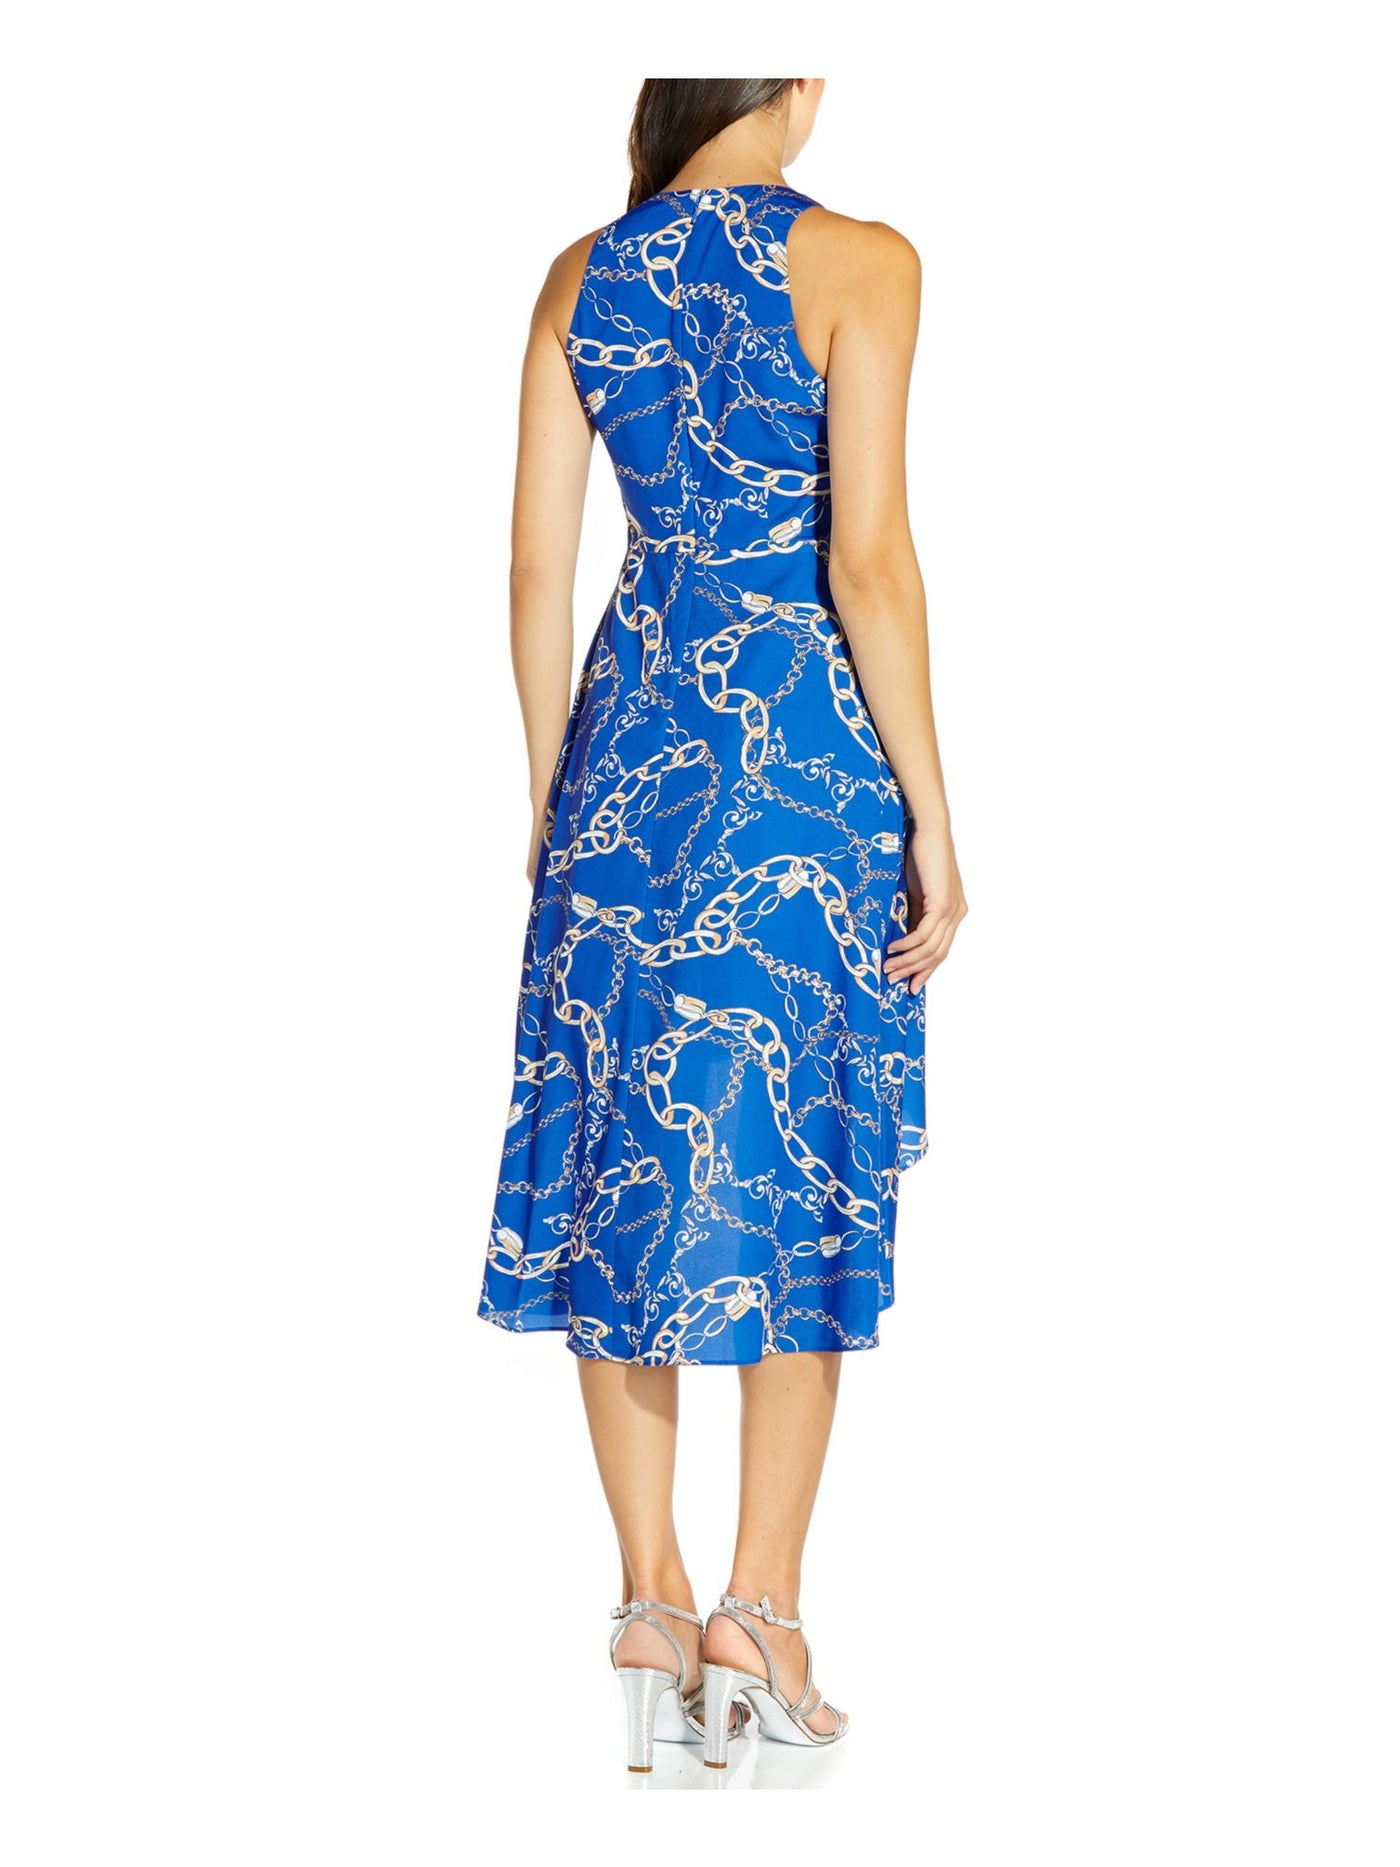 ADRIANNA PAPELL Womens Blue Zippered Hi-low Printed Sleeveless Crew Neck Below The Knee Party Fit + Flare Dress 10